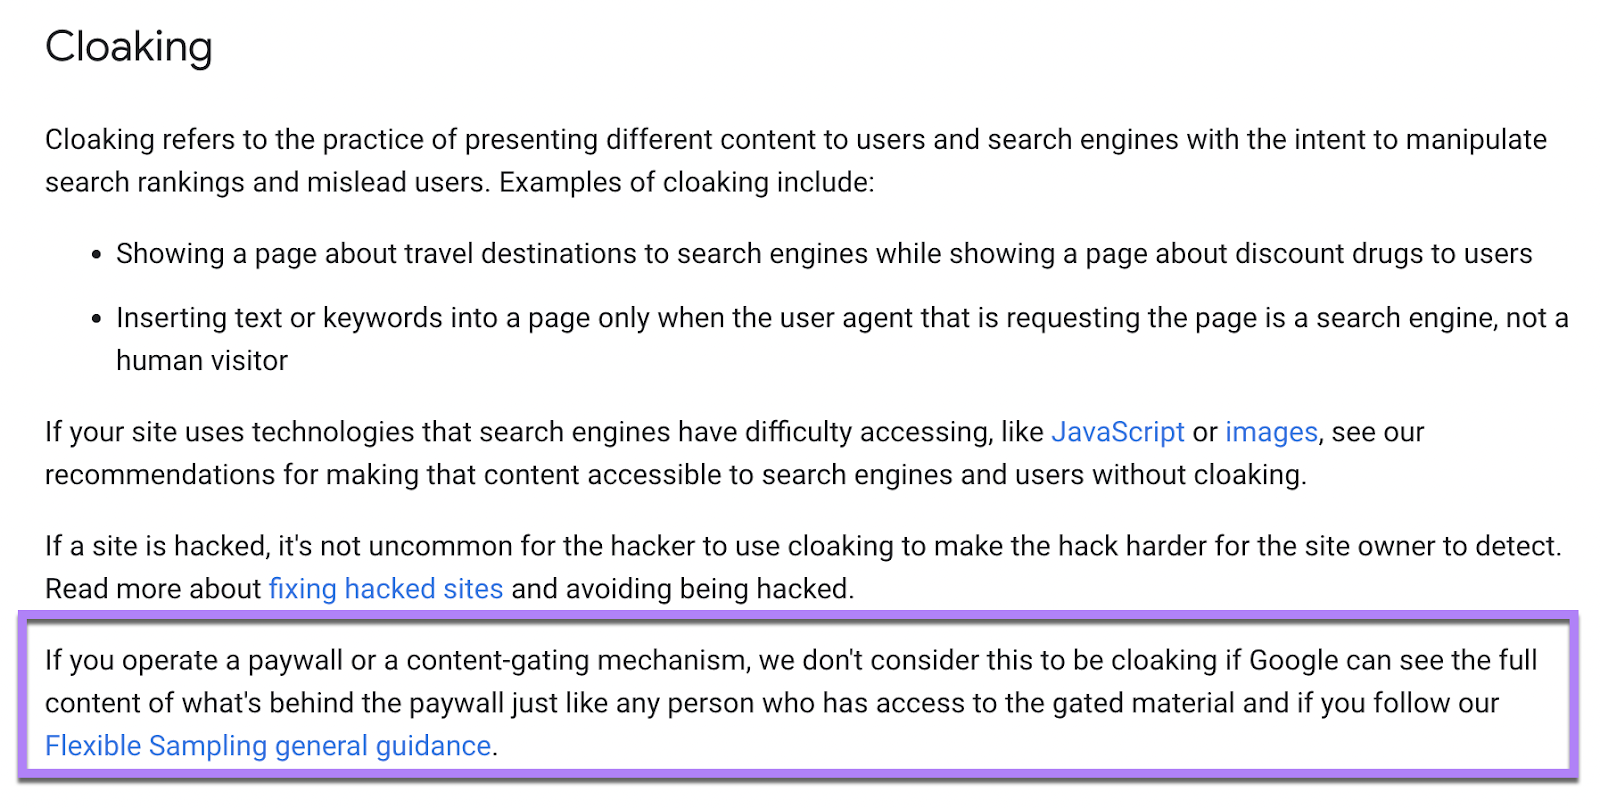 "Cloaking" section of Google’s spam policies